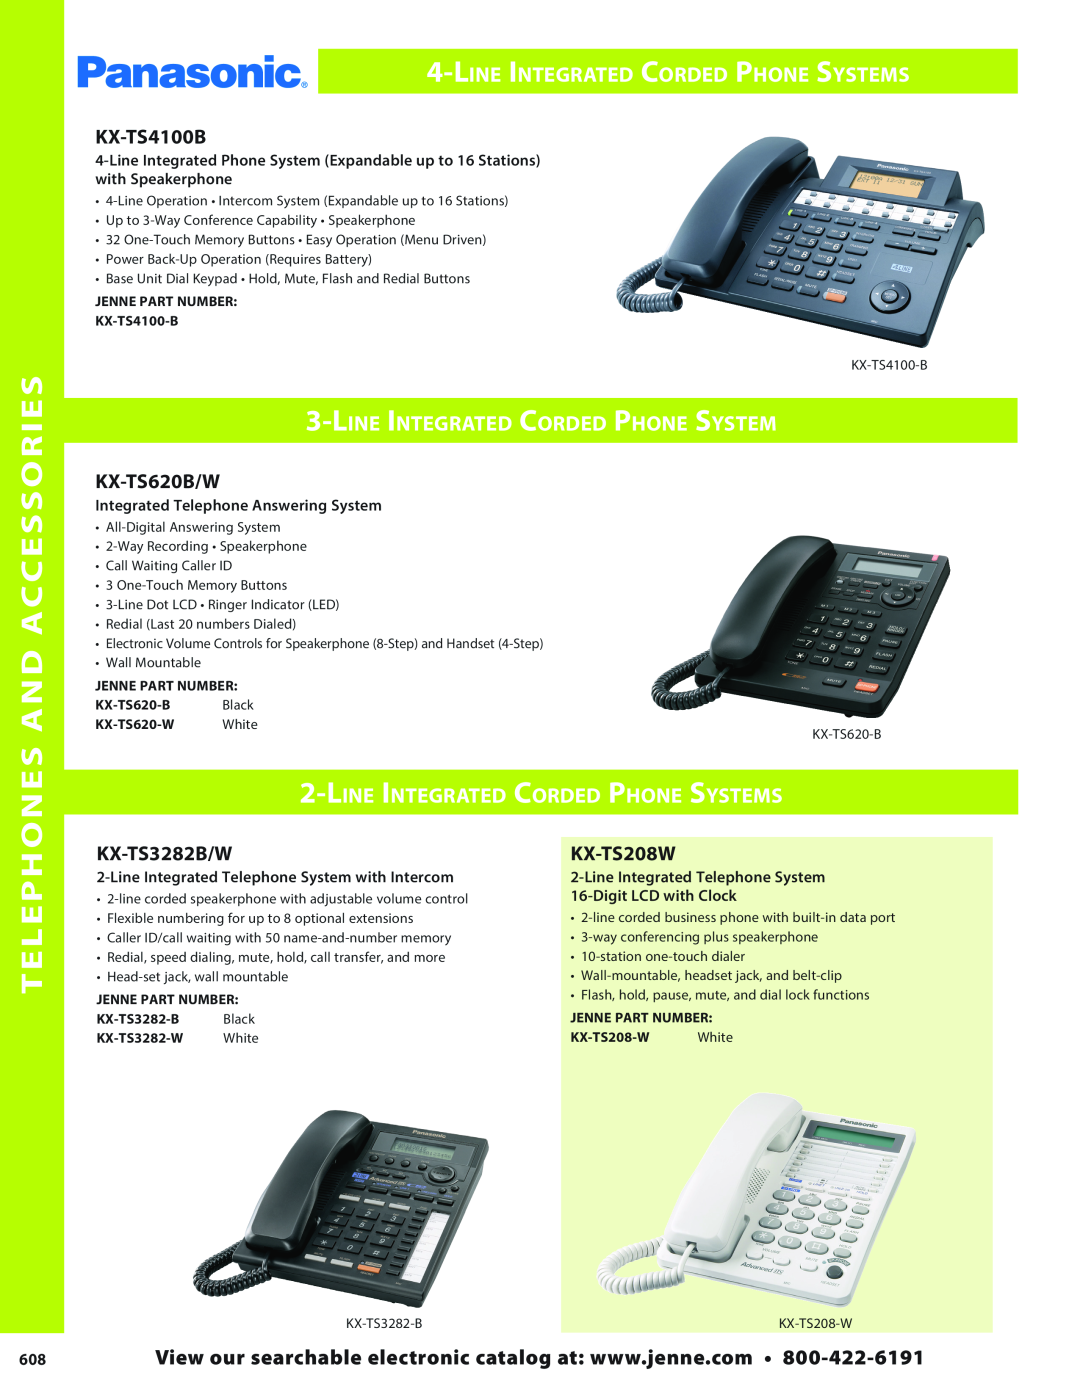 Panasonic PMPU2000 Line Integrated Corded Phone Systems, Telephones And Accessories, LineIntegrated Telephone System 